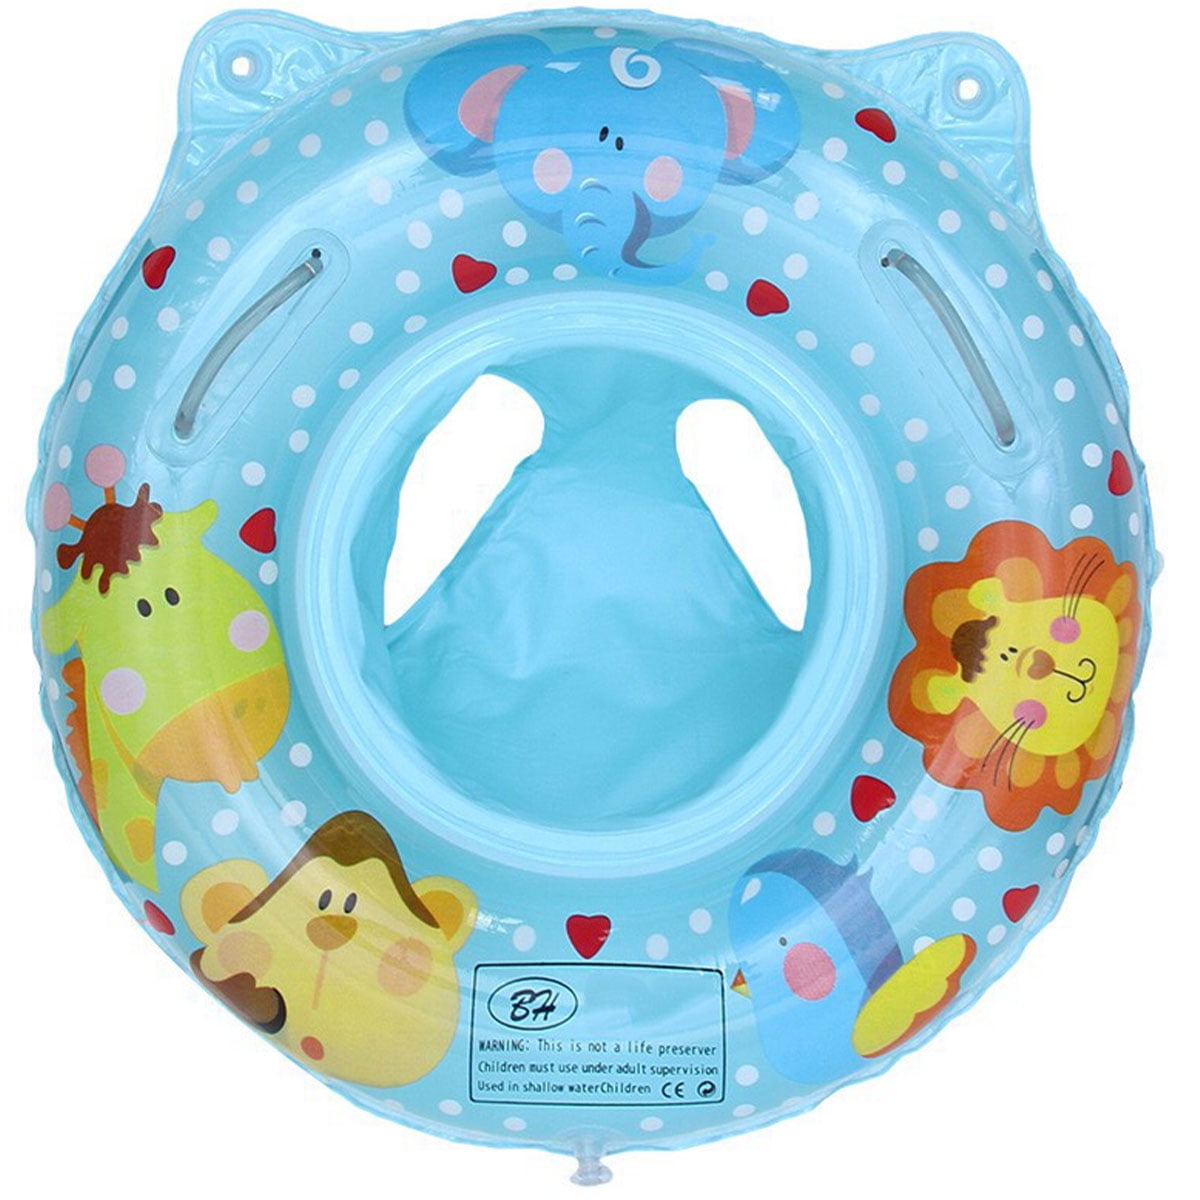 Details about   Baby Pool Inflatable Swimming Ring Seat Beach Swim Float Kids Toy 2-8 years old 